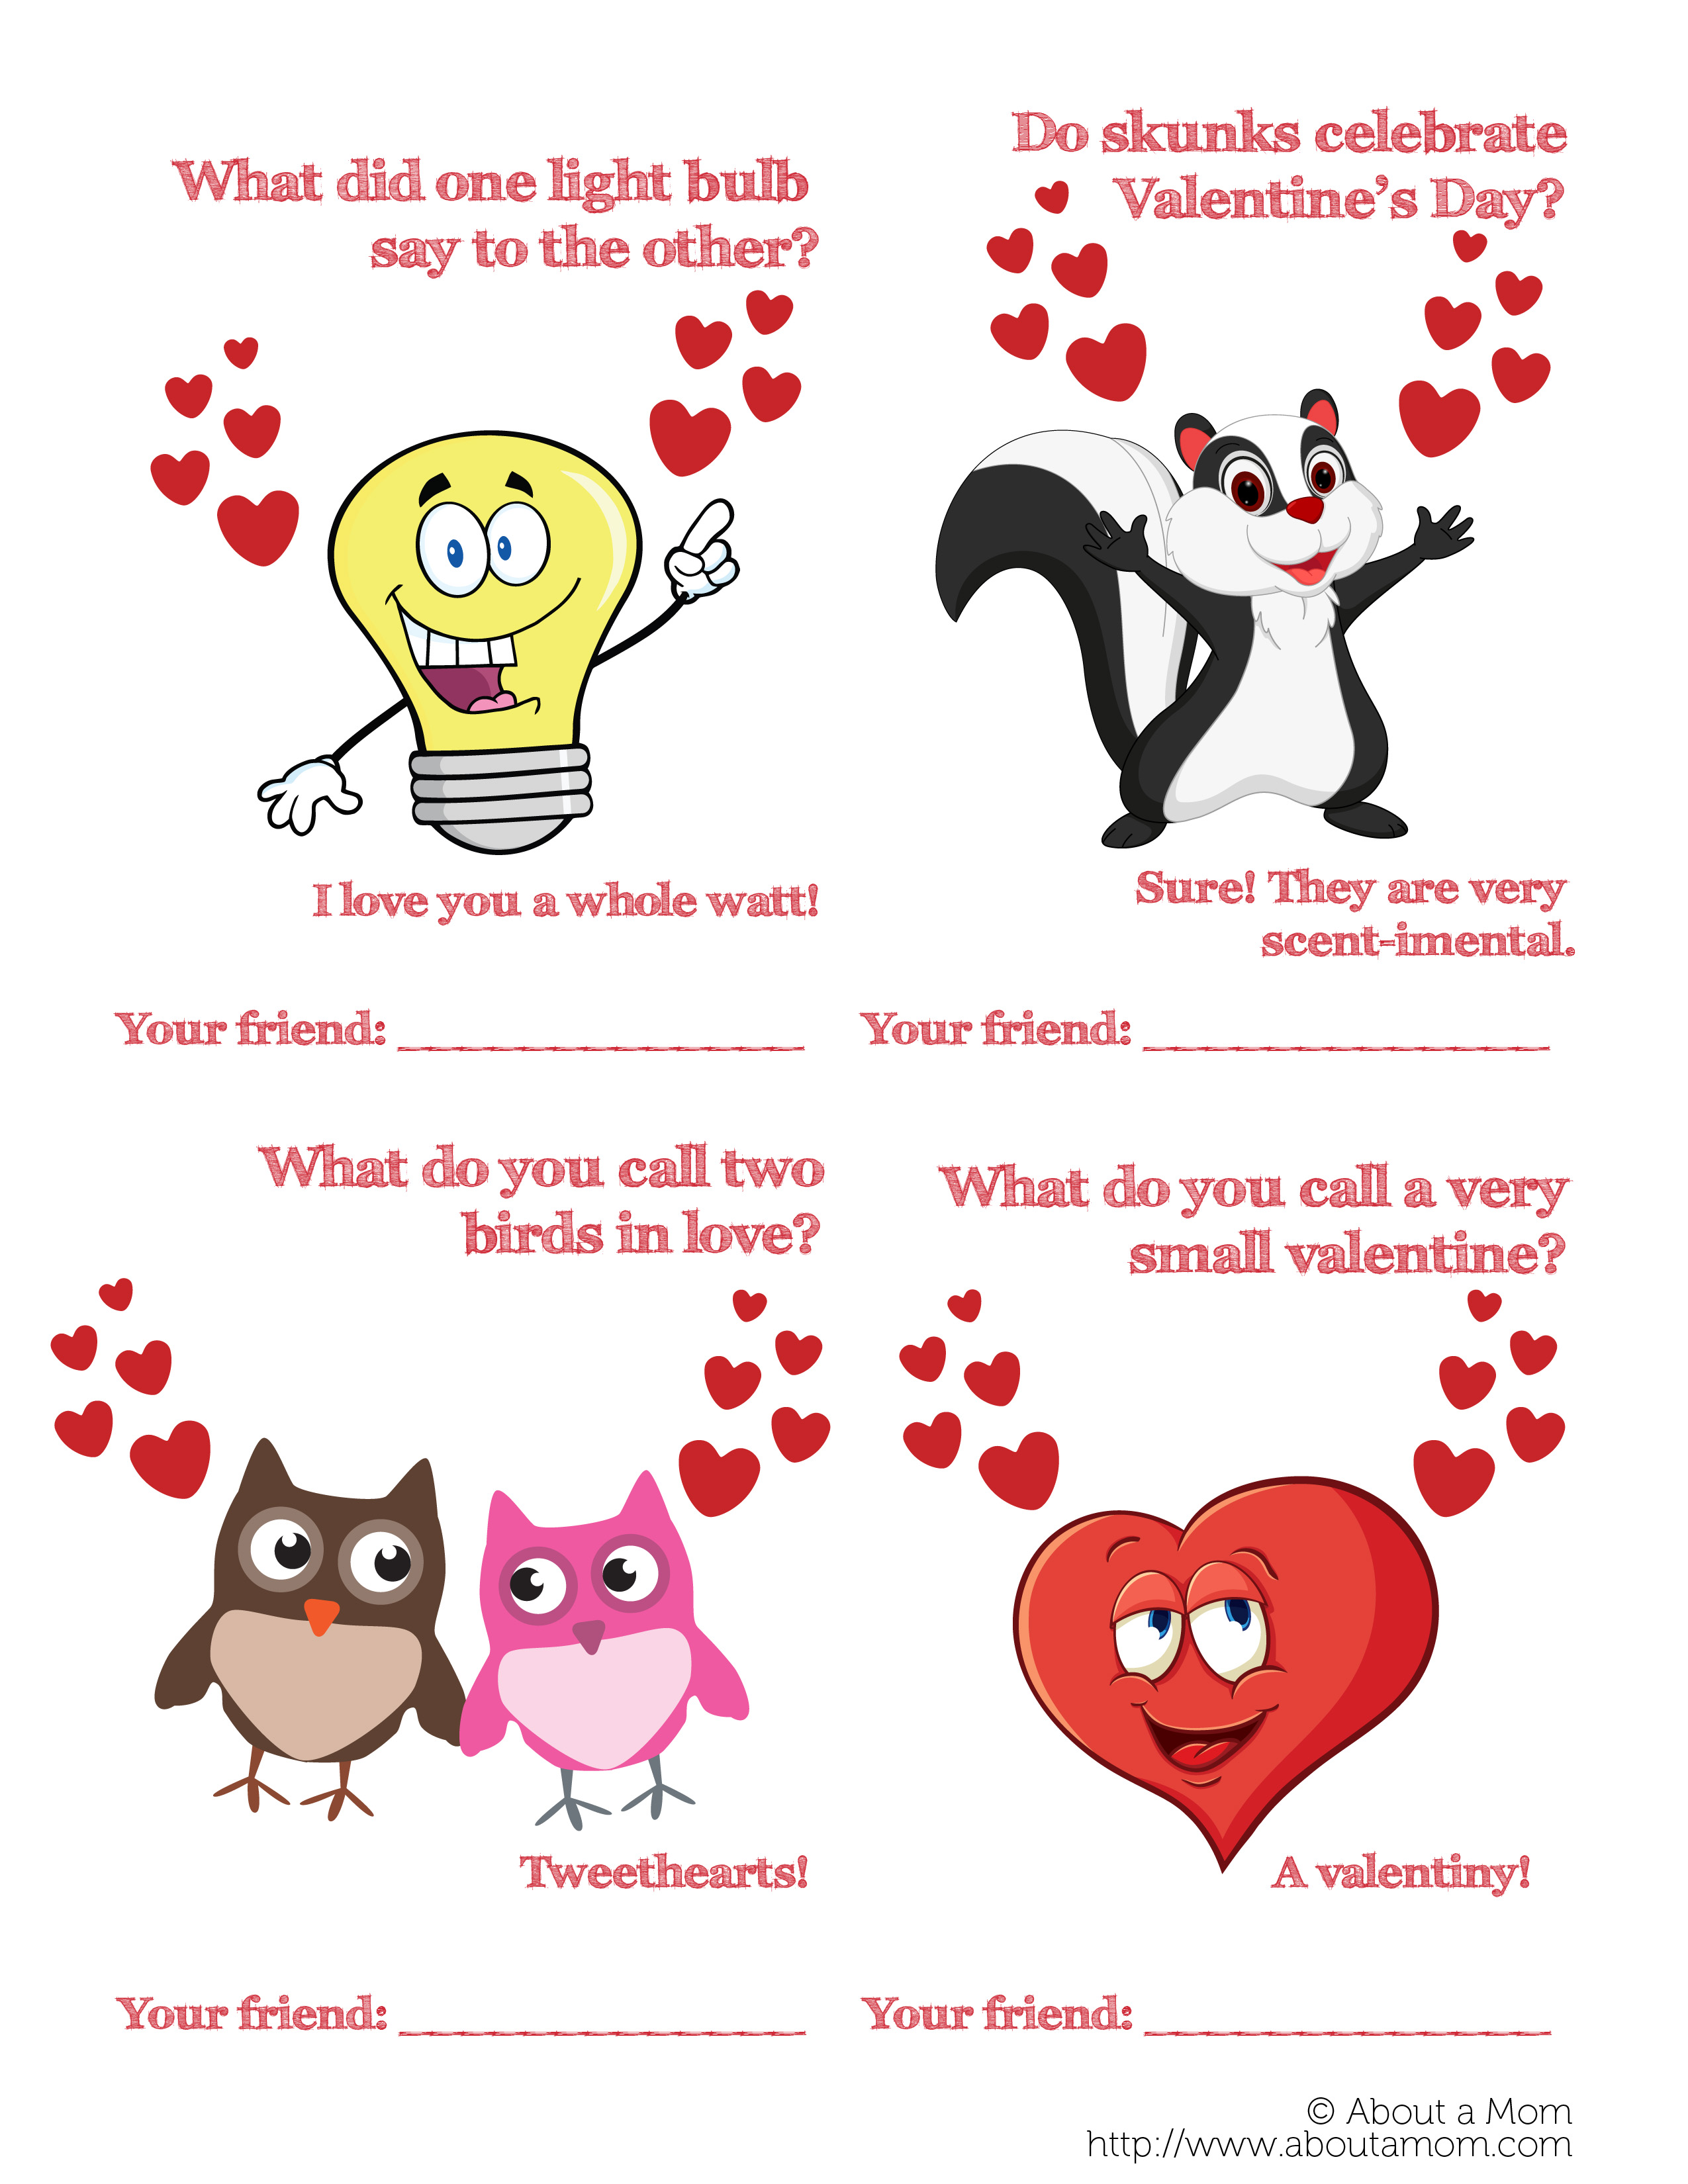 Does your child love jokes? Download and print out these printable funny Valentine's Day cards. These humorous Valentines are sure to make classmates chuckle. Anyone would love getting one of these cards. There are 8 different designs available to download and print for free.